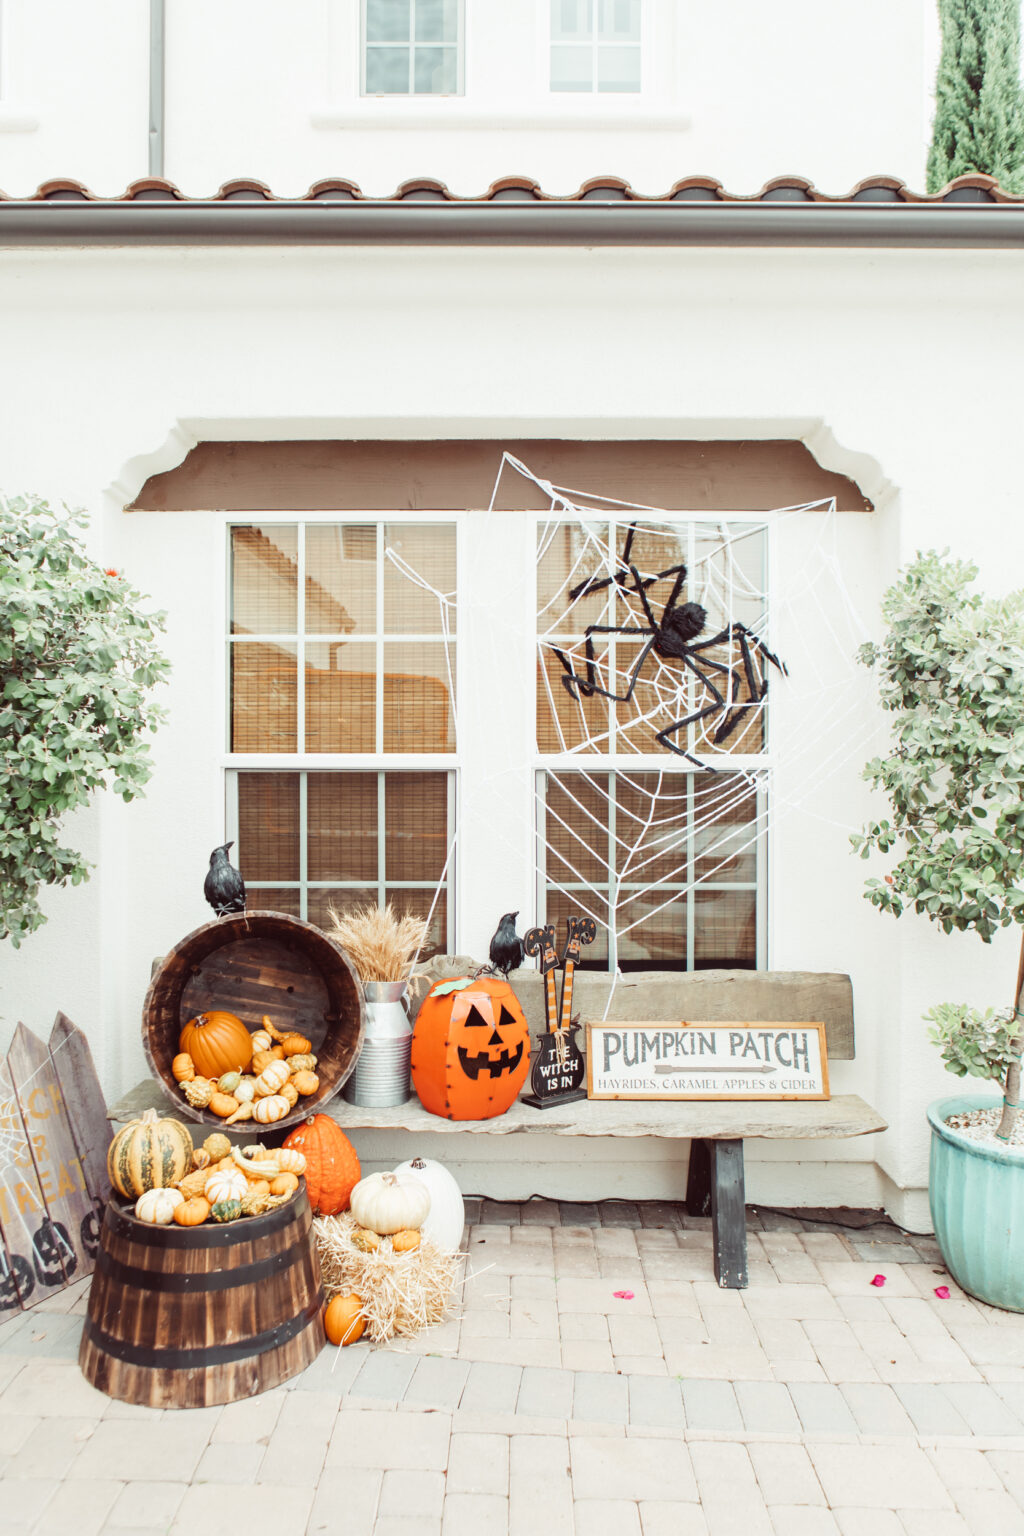 How I Decorated My Outdoor Space for Halloween - City Girl Gone Mom